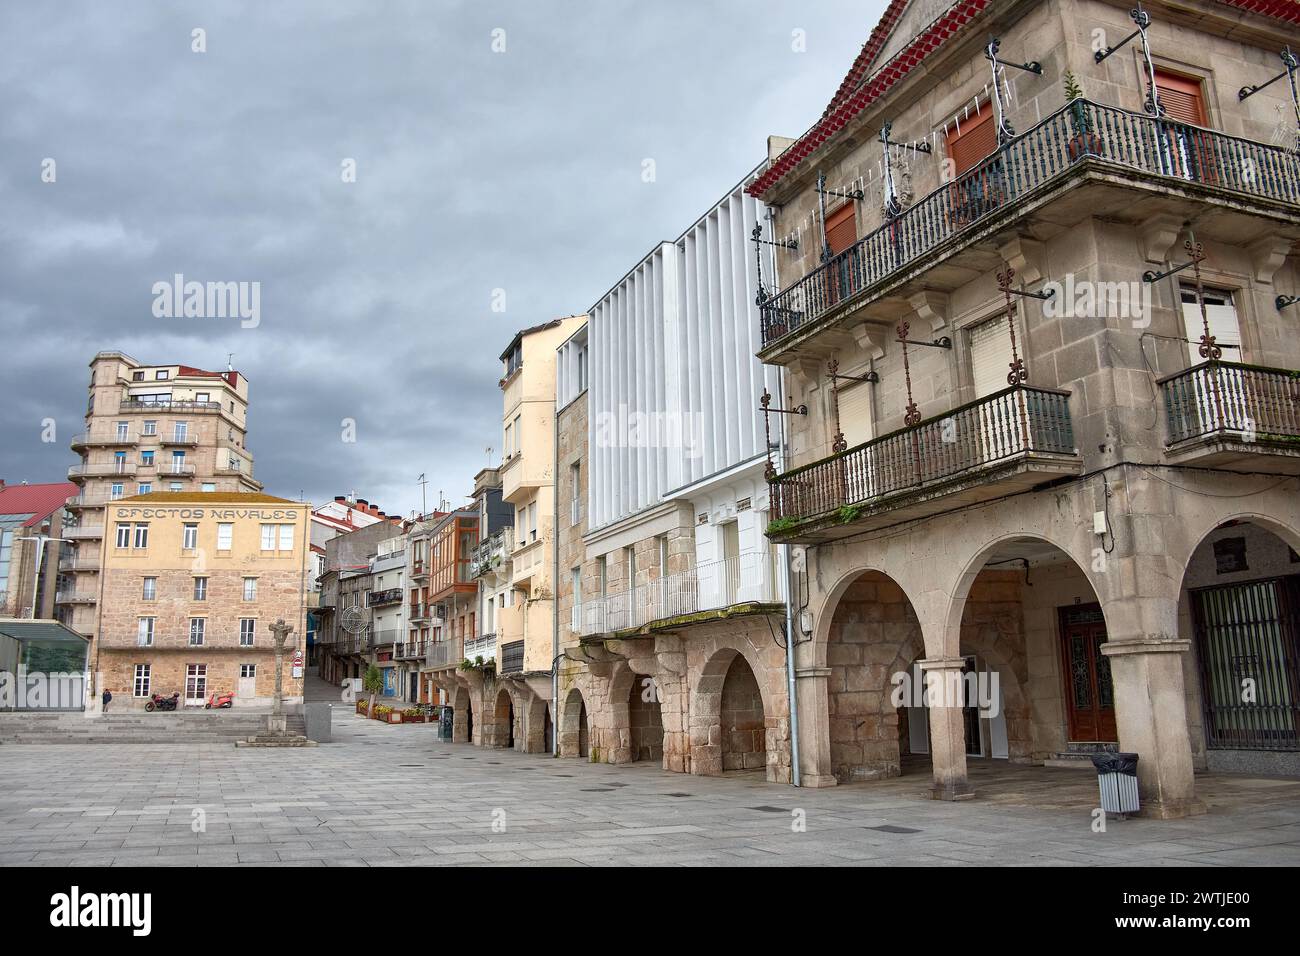 Plaza do Berbes in the historic center of Vigo on a cloudy day without people Stock Photo